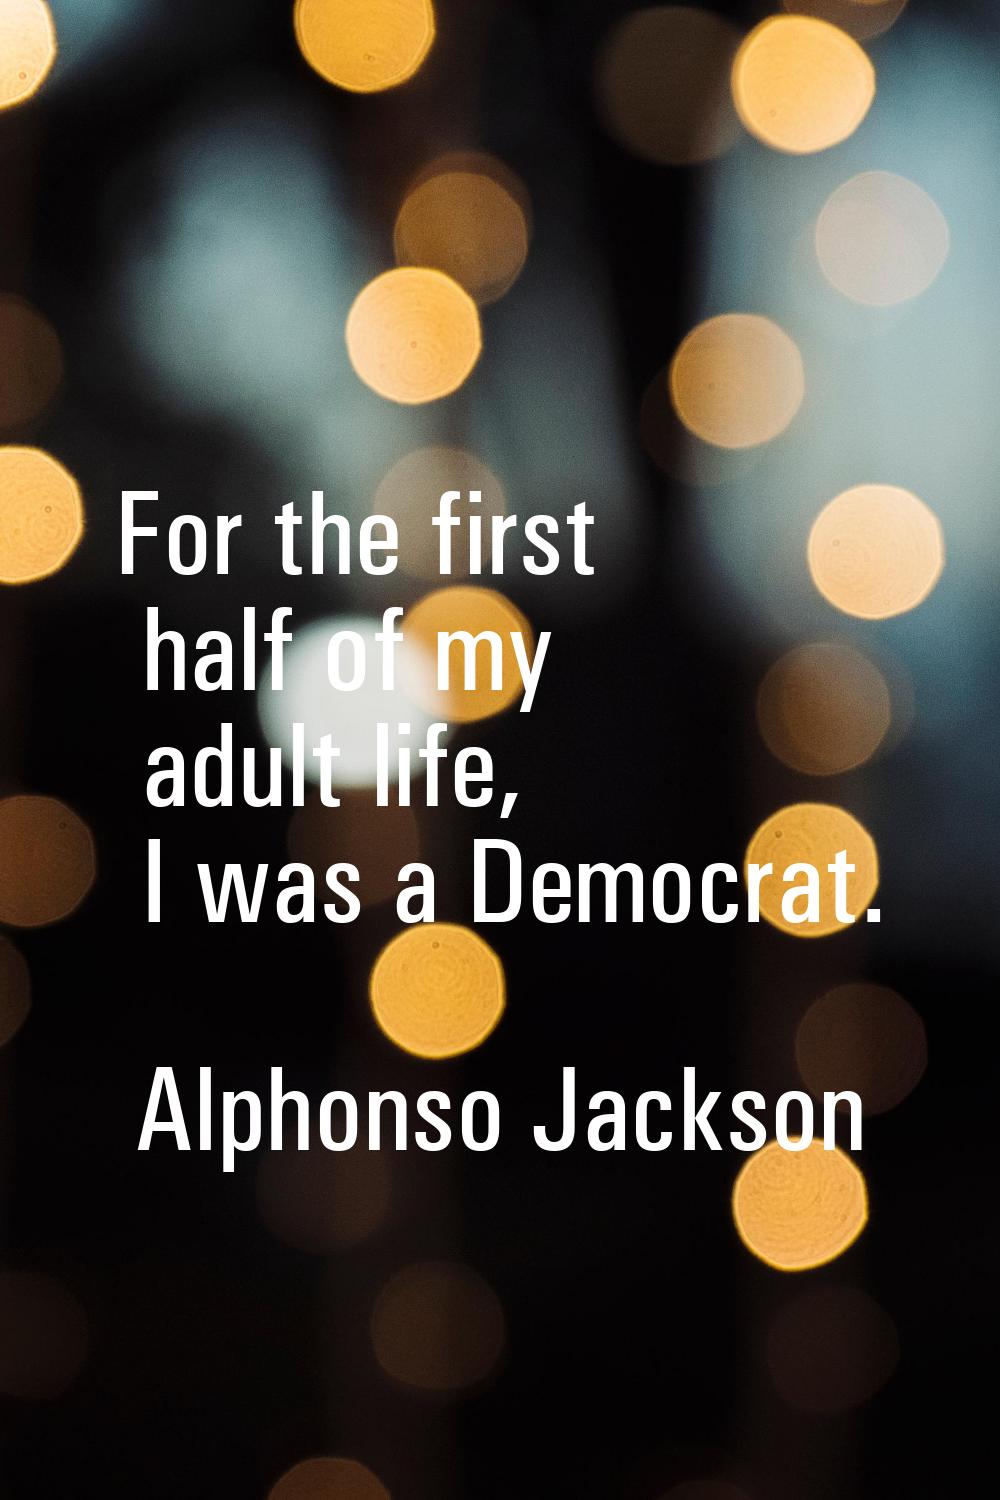 For the first half of my adult life, I was a Democrat.